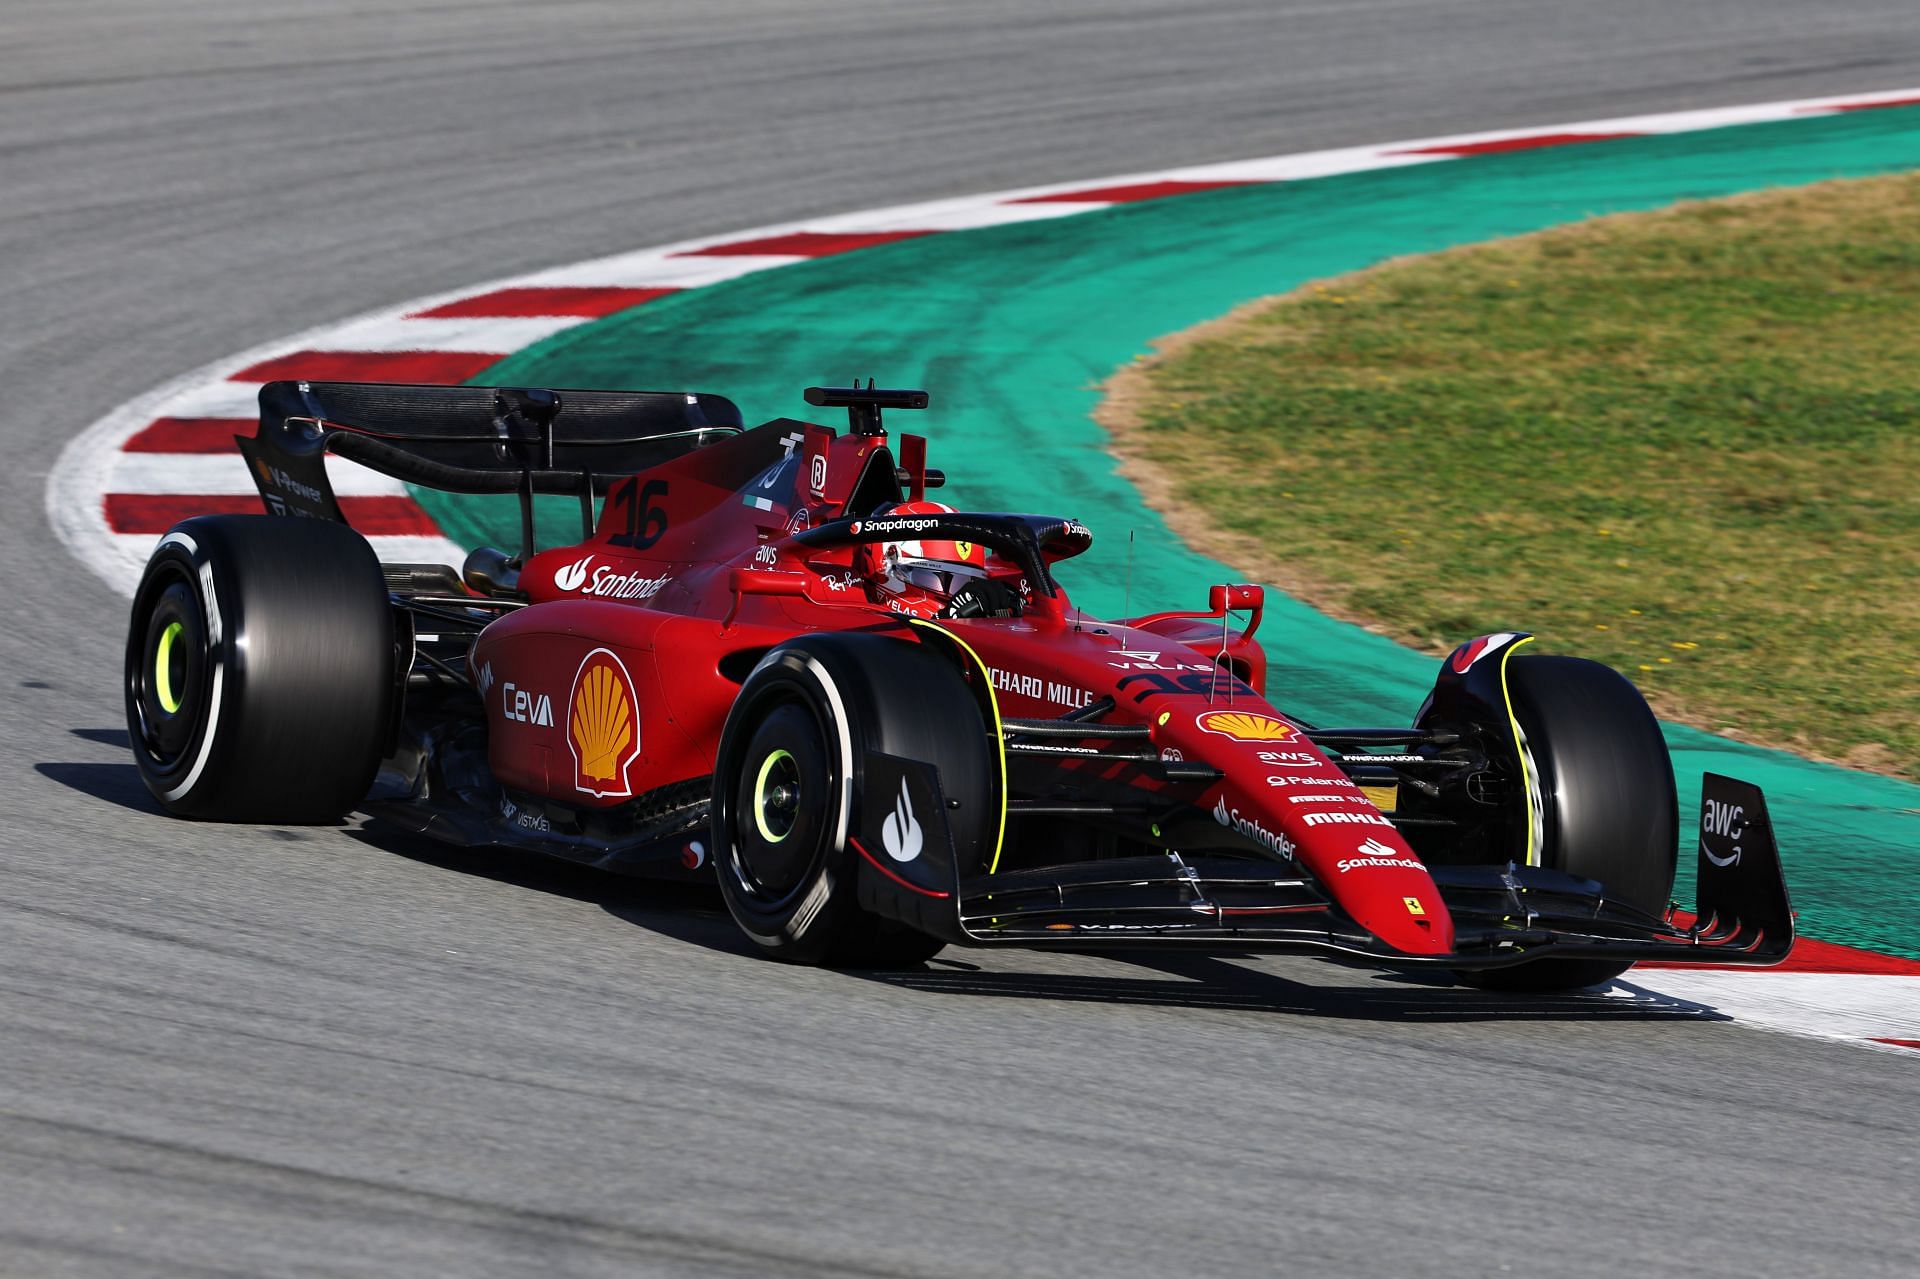 Ferrari team principal feels 'our car in the slow corners behaves well'